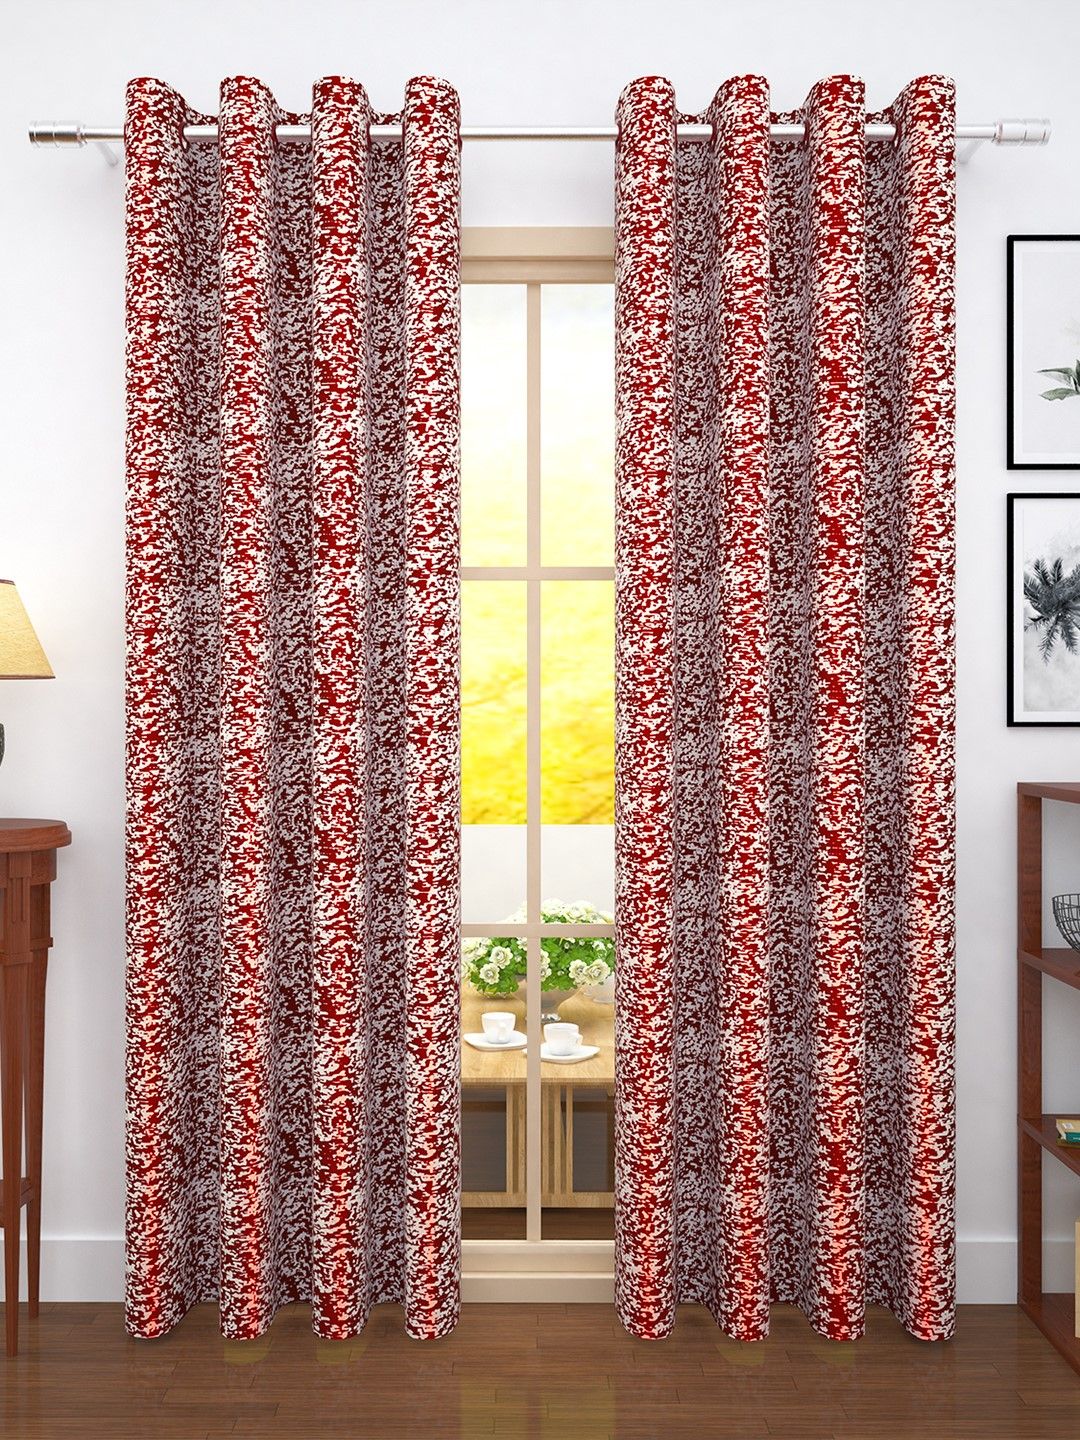 Story@home Red & White Set of 2 Door Curtains Price in India